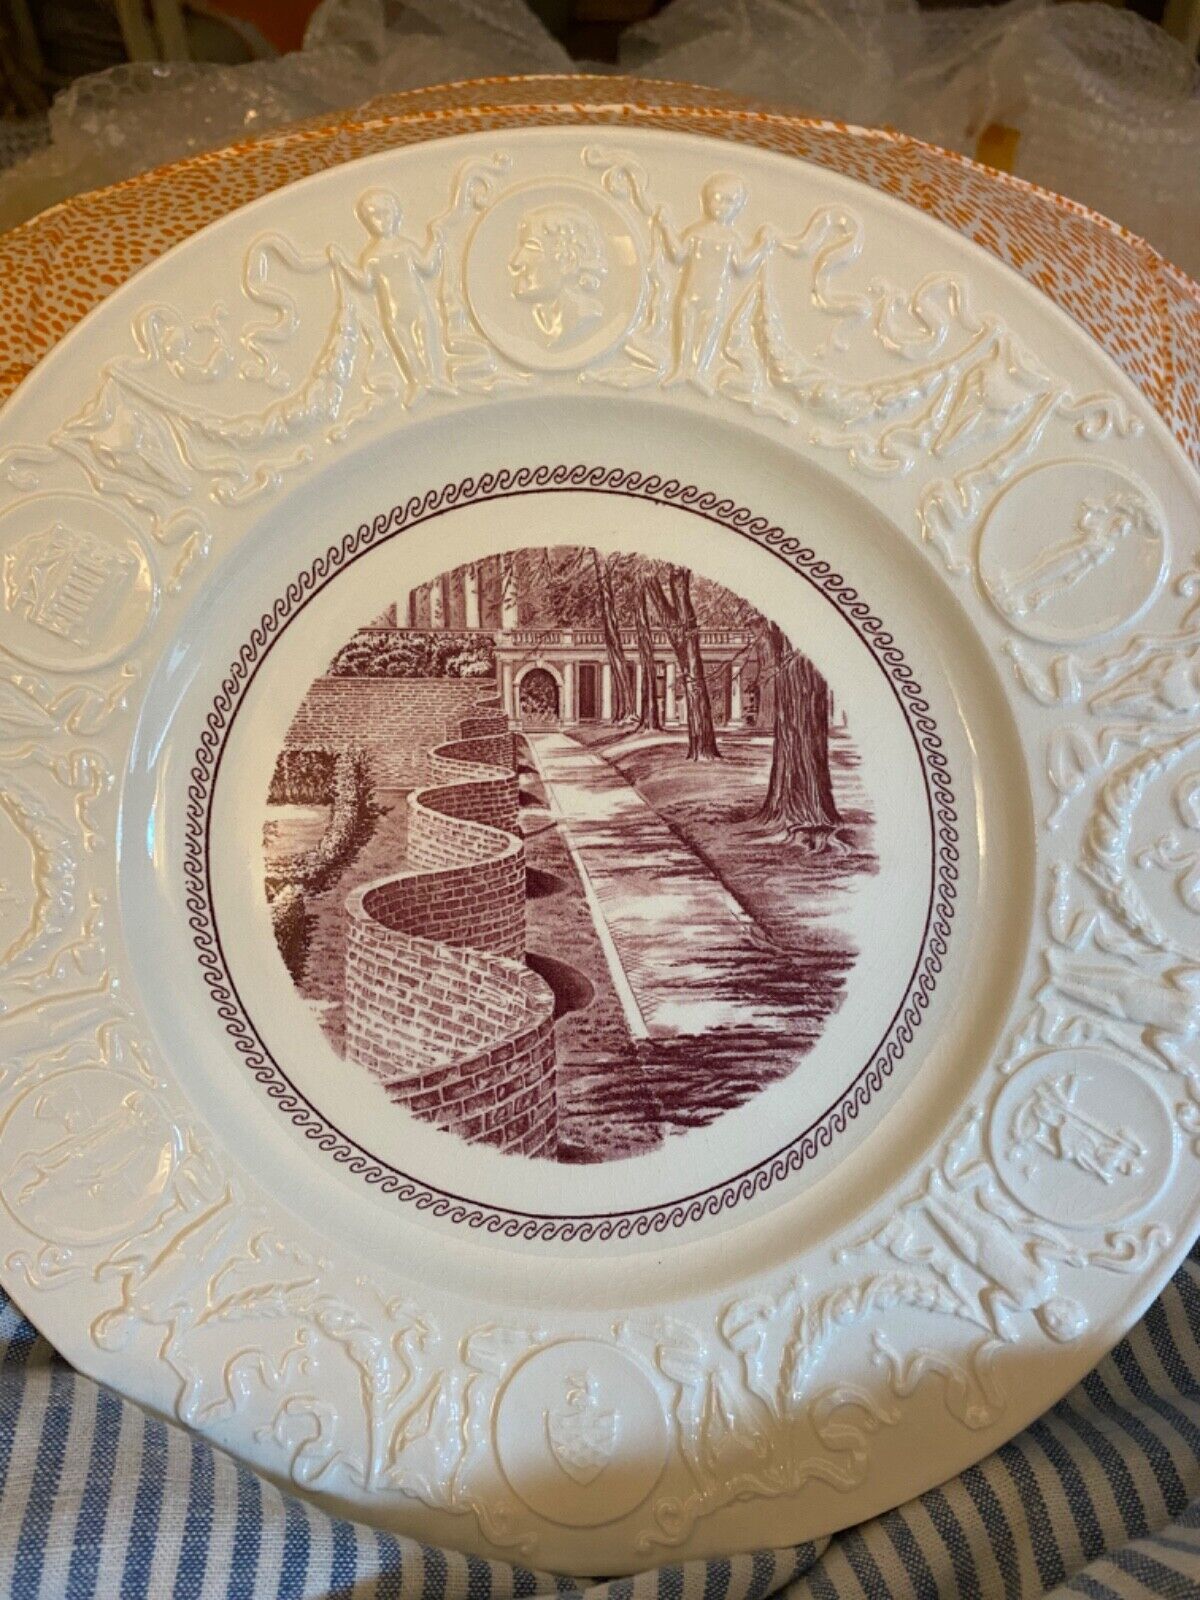 University of Virginia Wedgwood First Edition Commemorative dinner plates